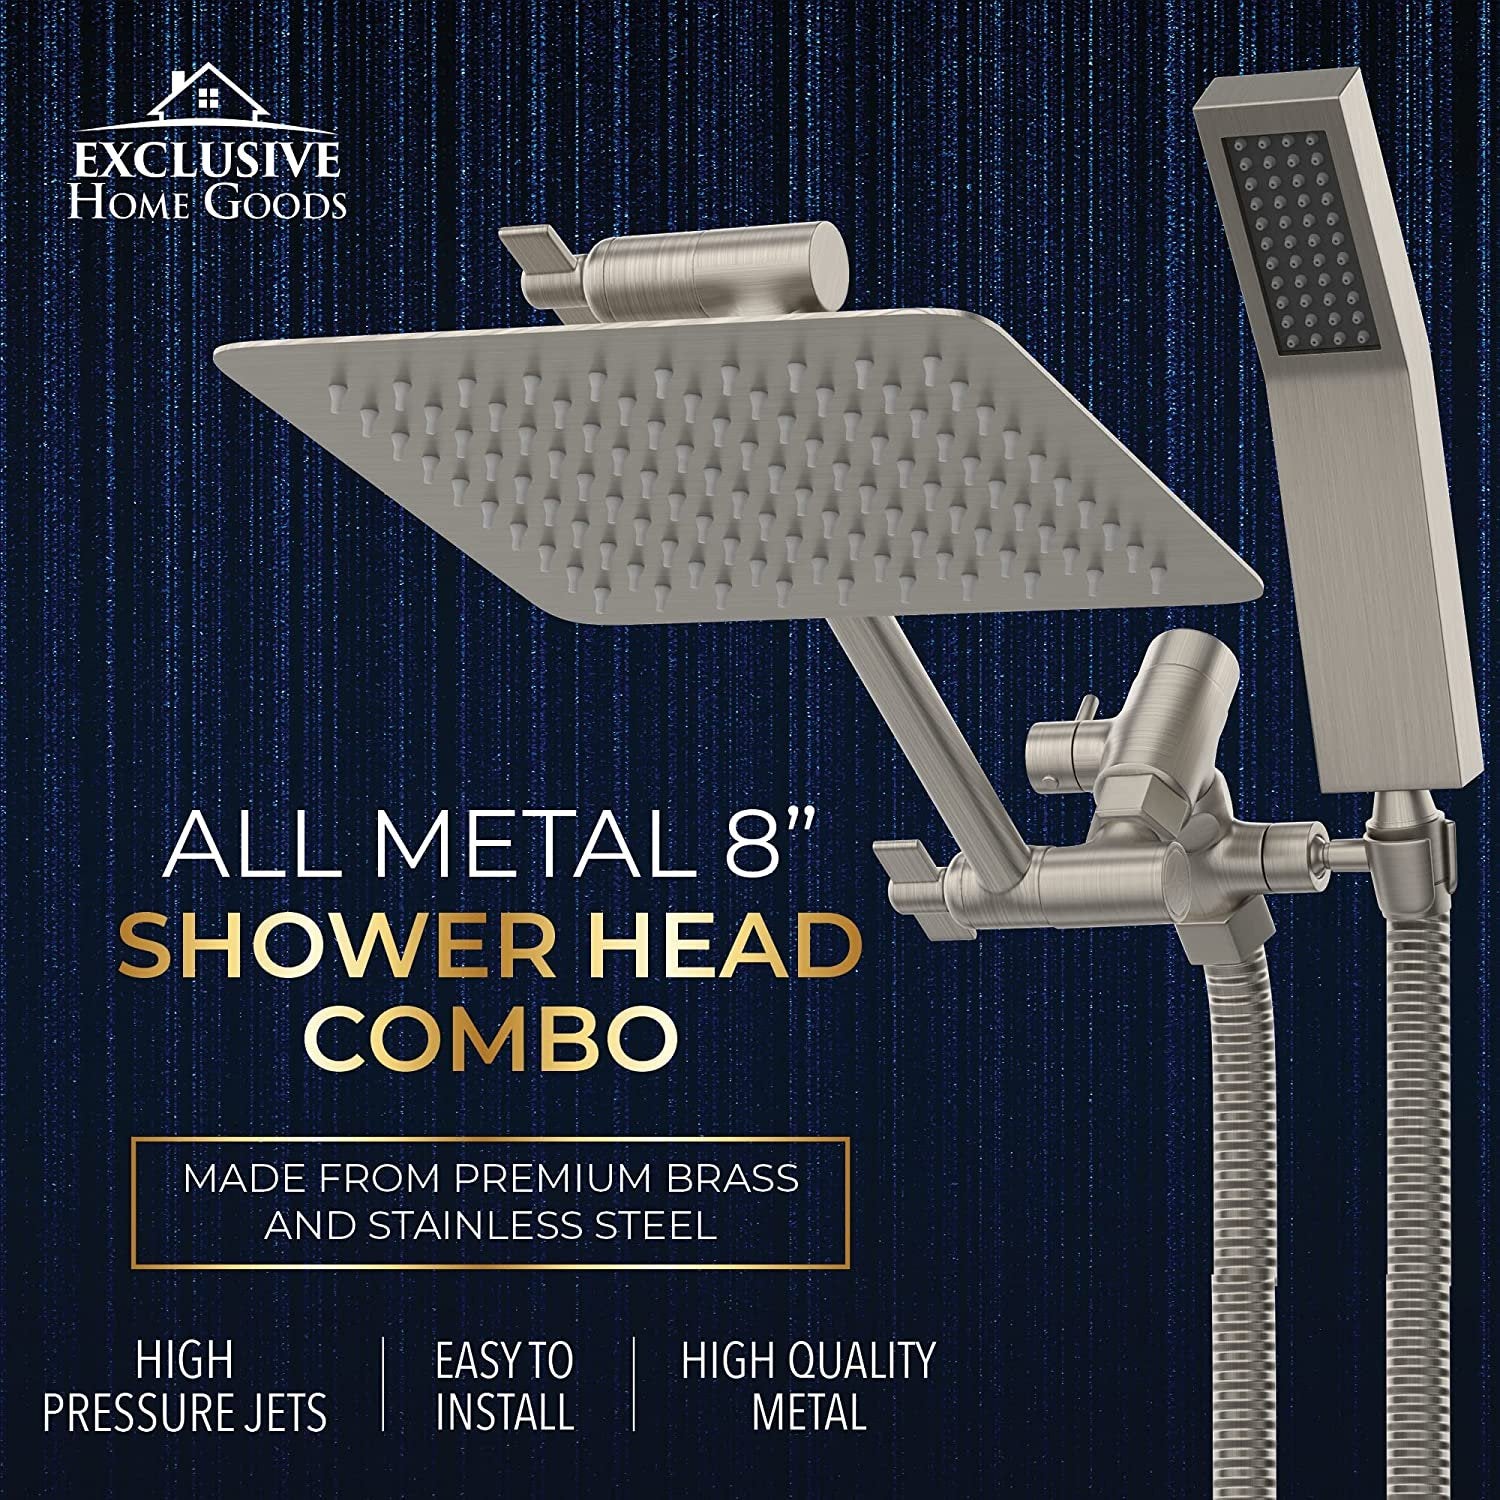 Exclusive Home Goods - Large 8 Inch All Metal Rainfall Shower Head With Handheld High Pressure Dual Shower Head Combo Set - Rain Showerhead with Adjustable Extension Arm, 71" Hose - Nickel